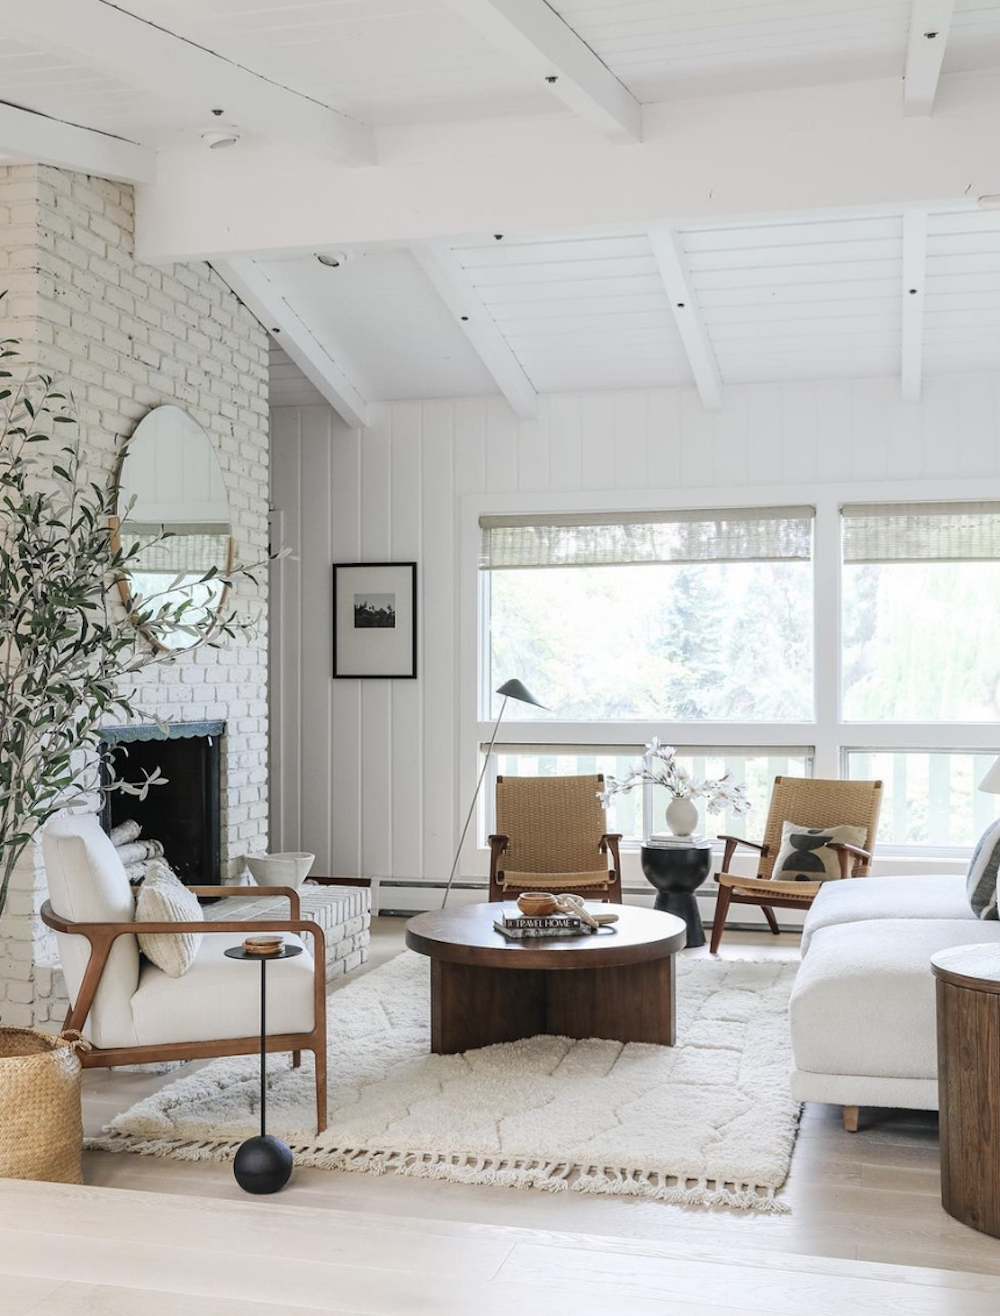 image of a white and airy living room with mid century modern style furnishings